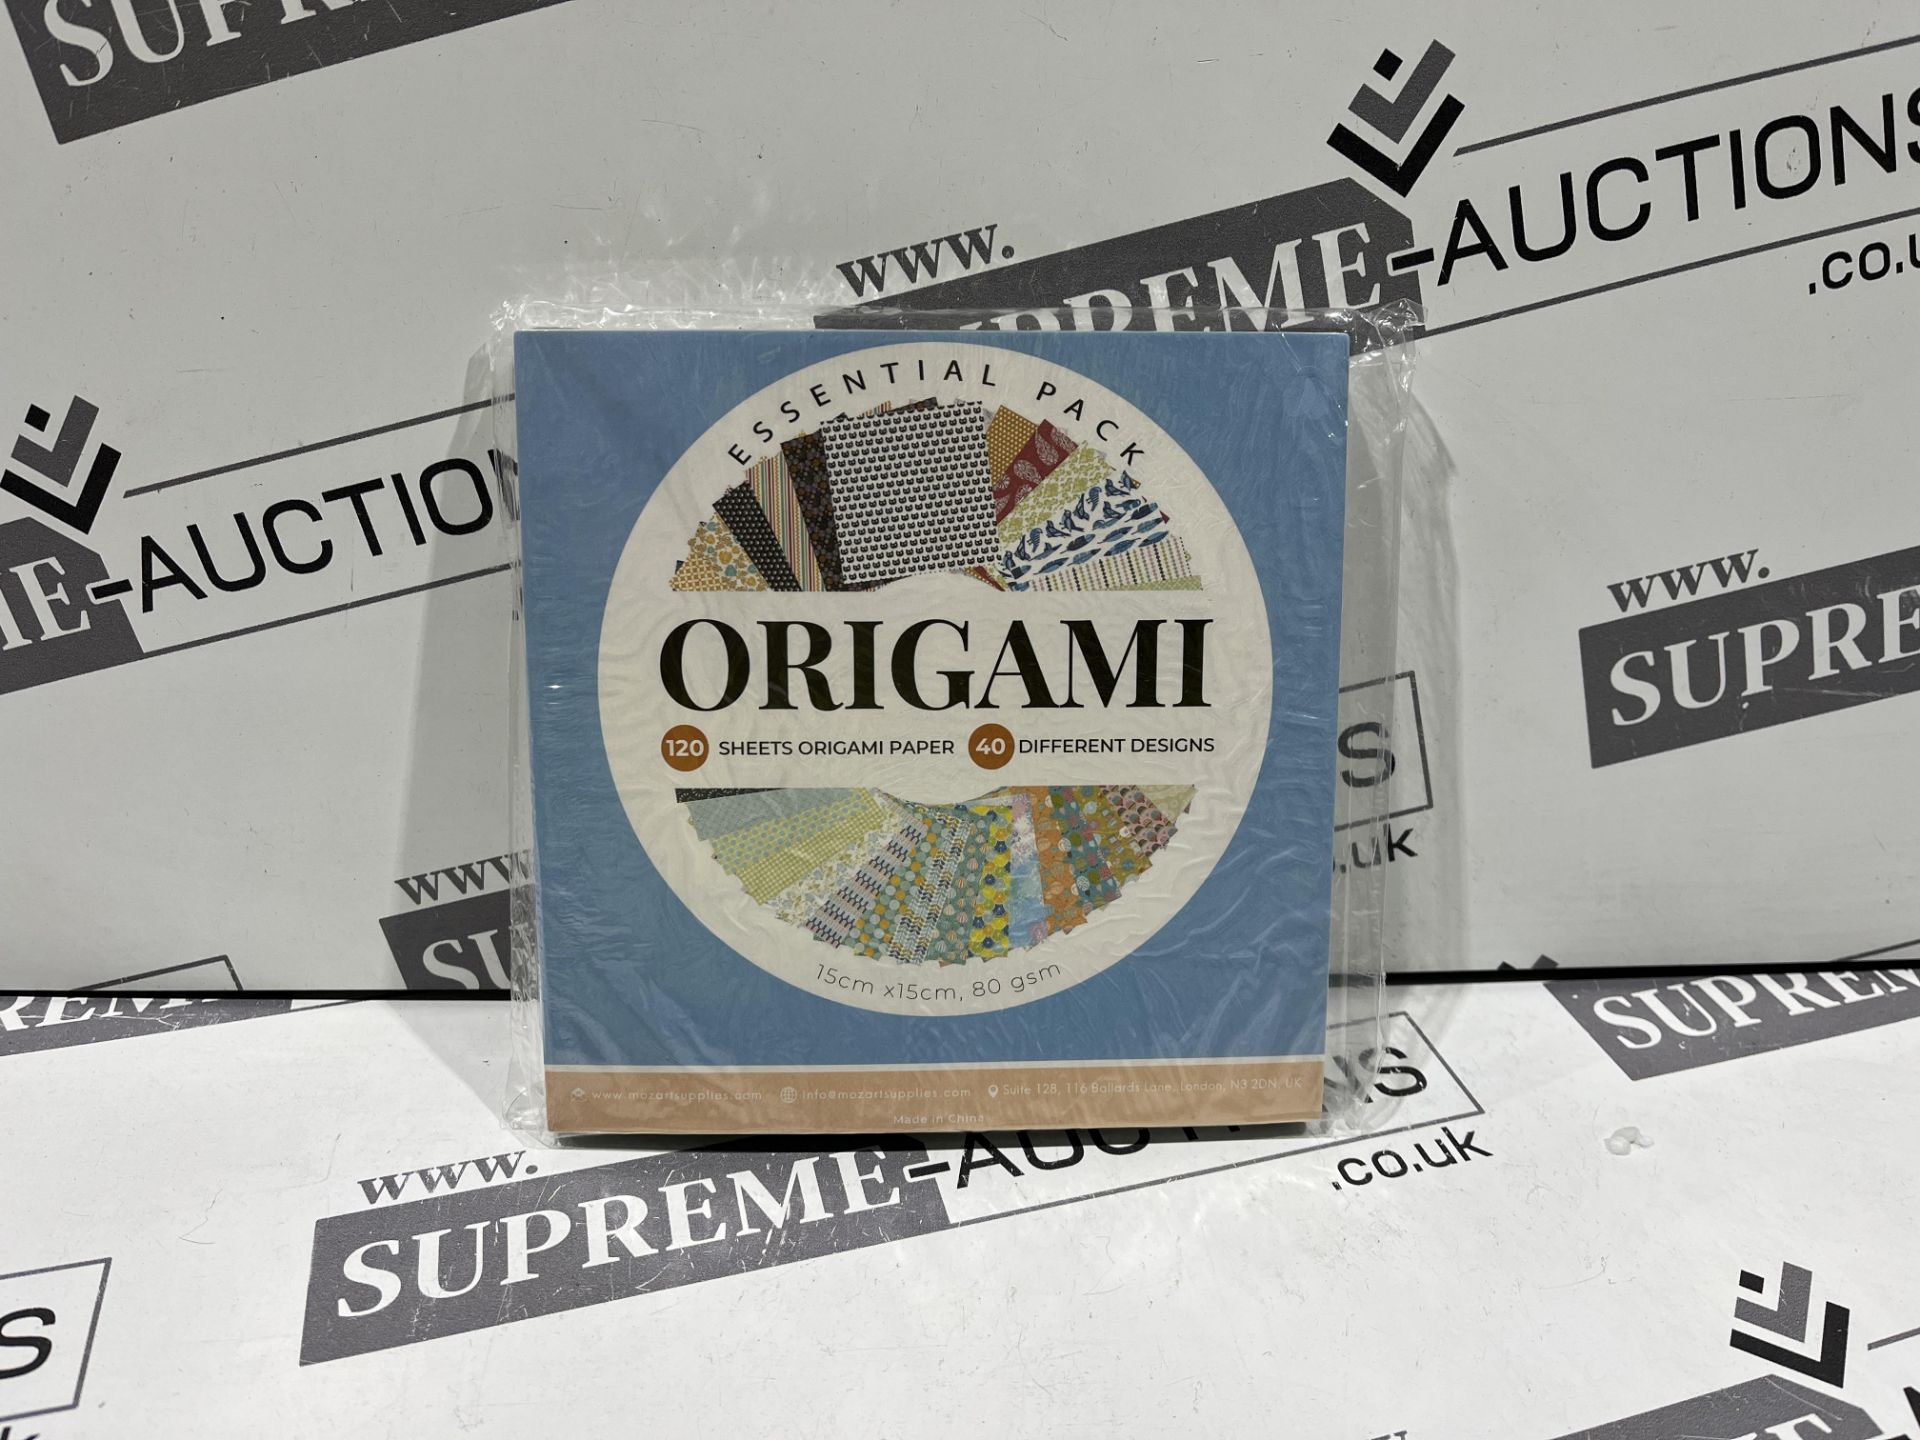 24 X BRAND NEW ORIGAMI PAPER SETS 120 SHEETS ASSORTED OF TRADITIONAL ORIGAMI FOLDING PAPER RRP £25